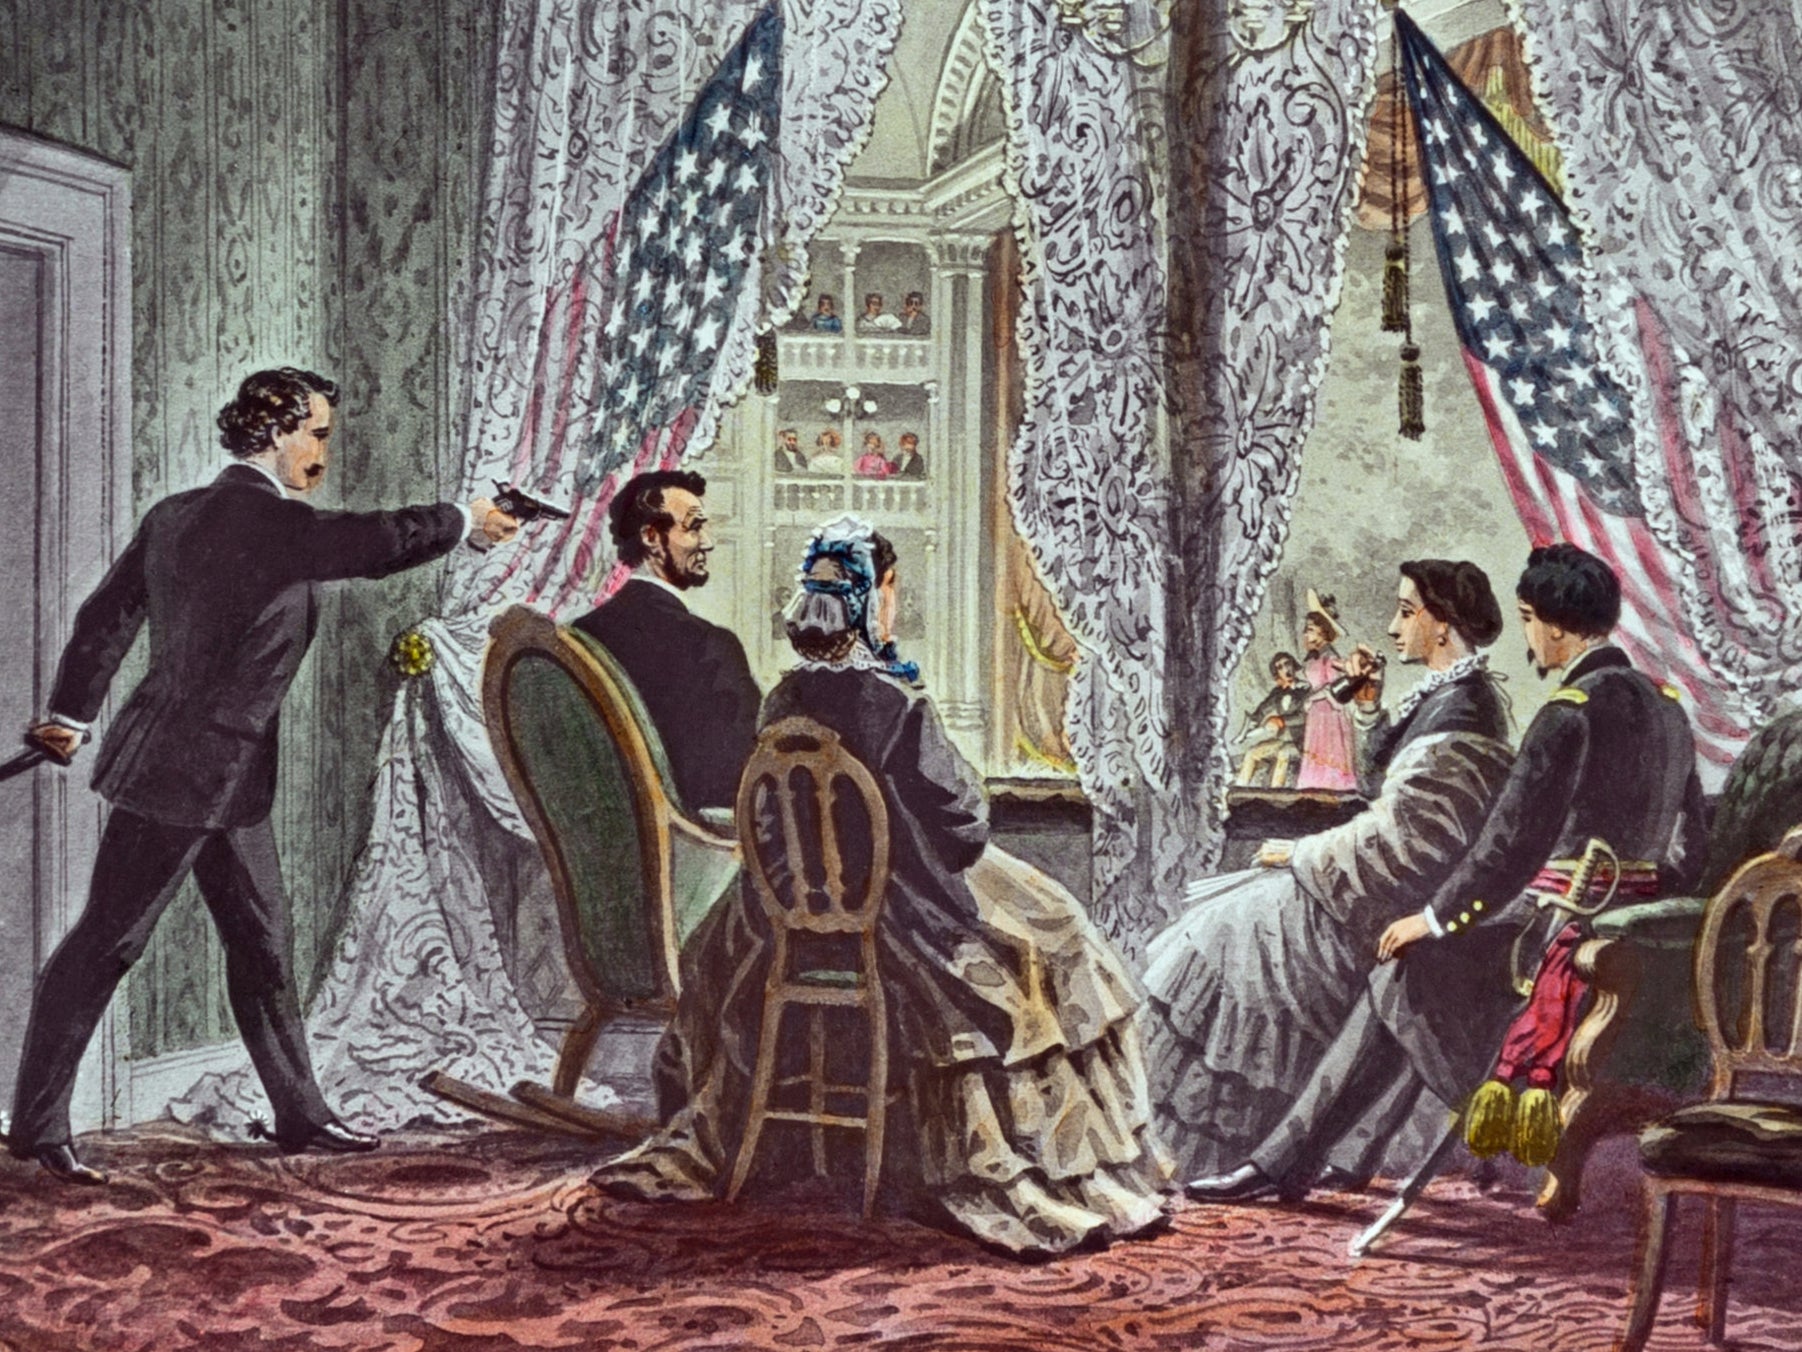 How Lincoln’s assassination was portrayed